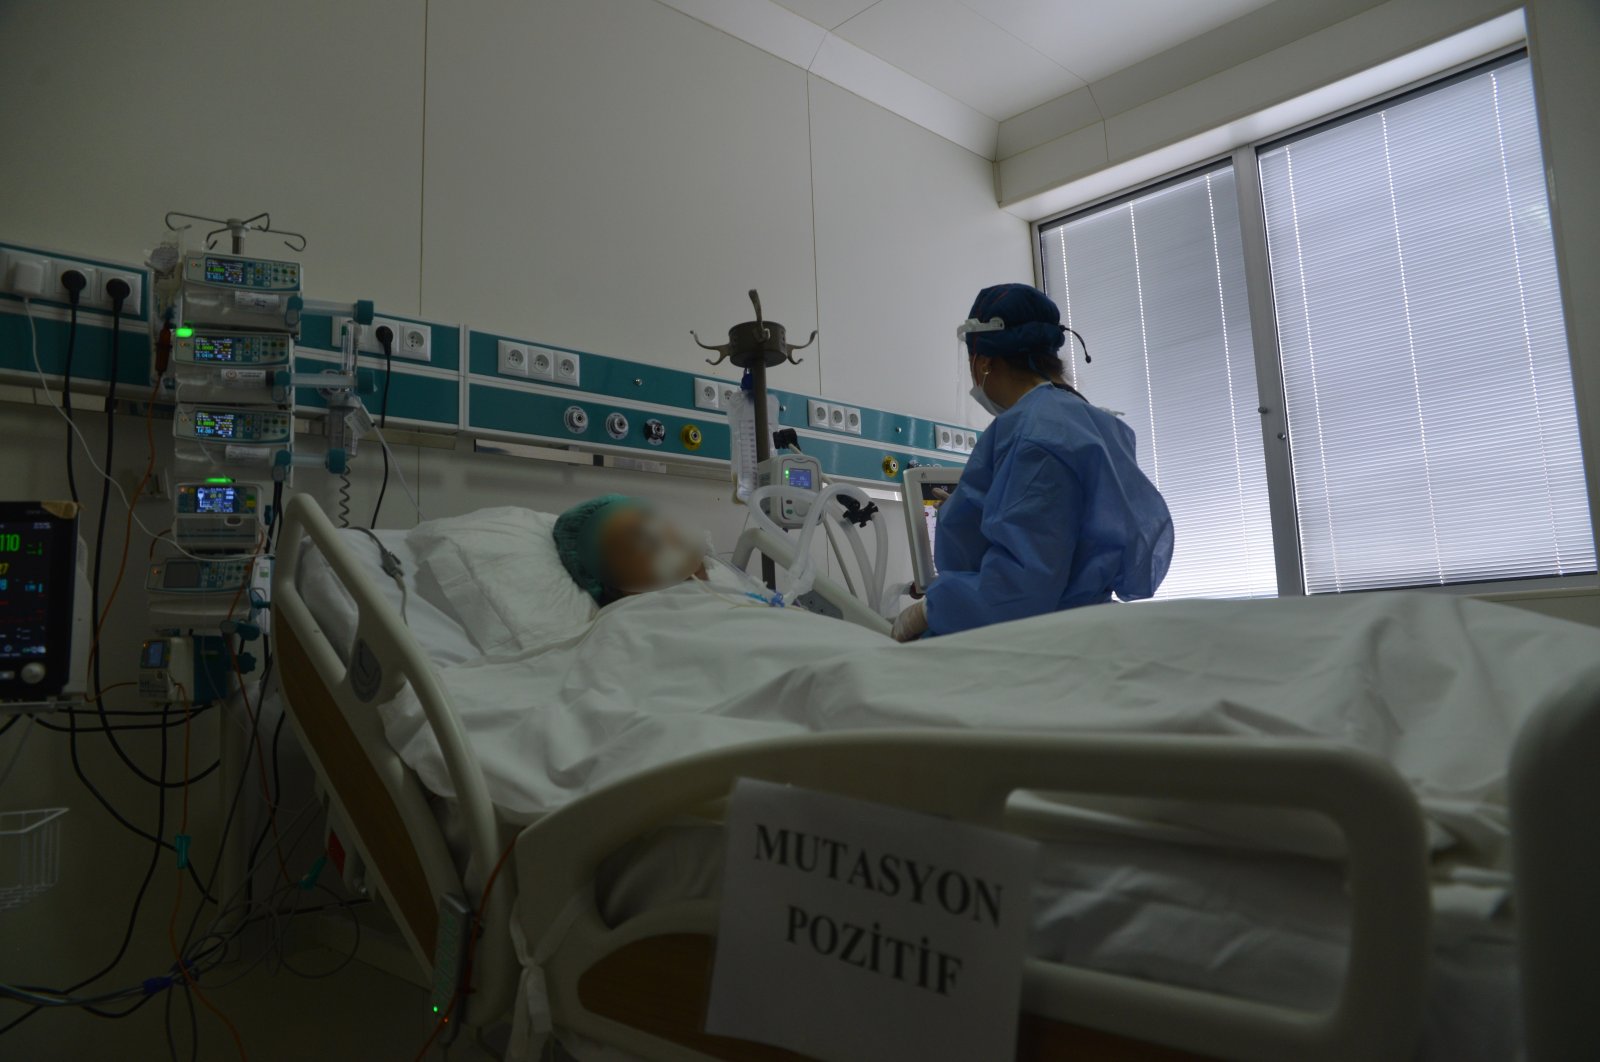 A doctor attends to a COVID-19 patient at a hospital in the capital Ankara, Turkey, April 16, 2021. (DHA PHOTO)